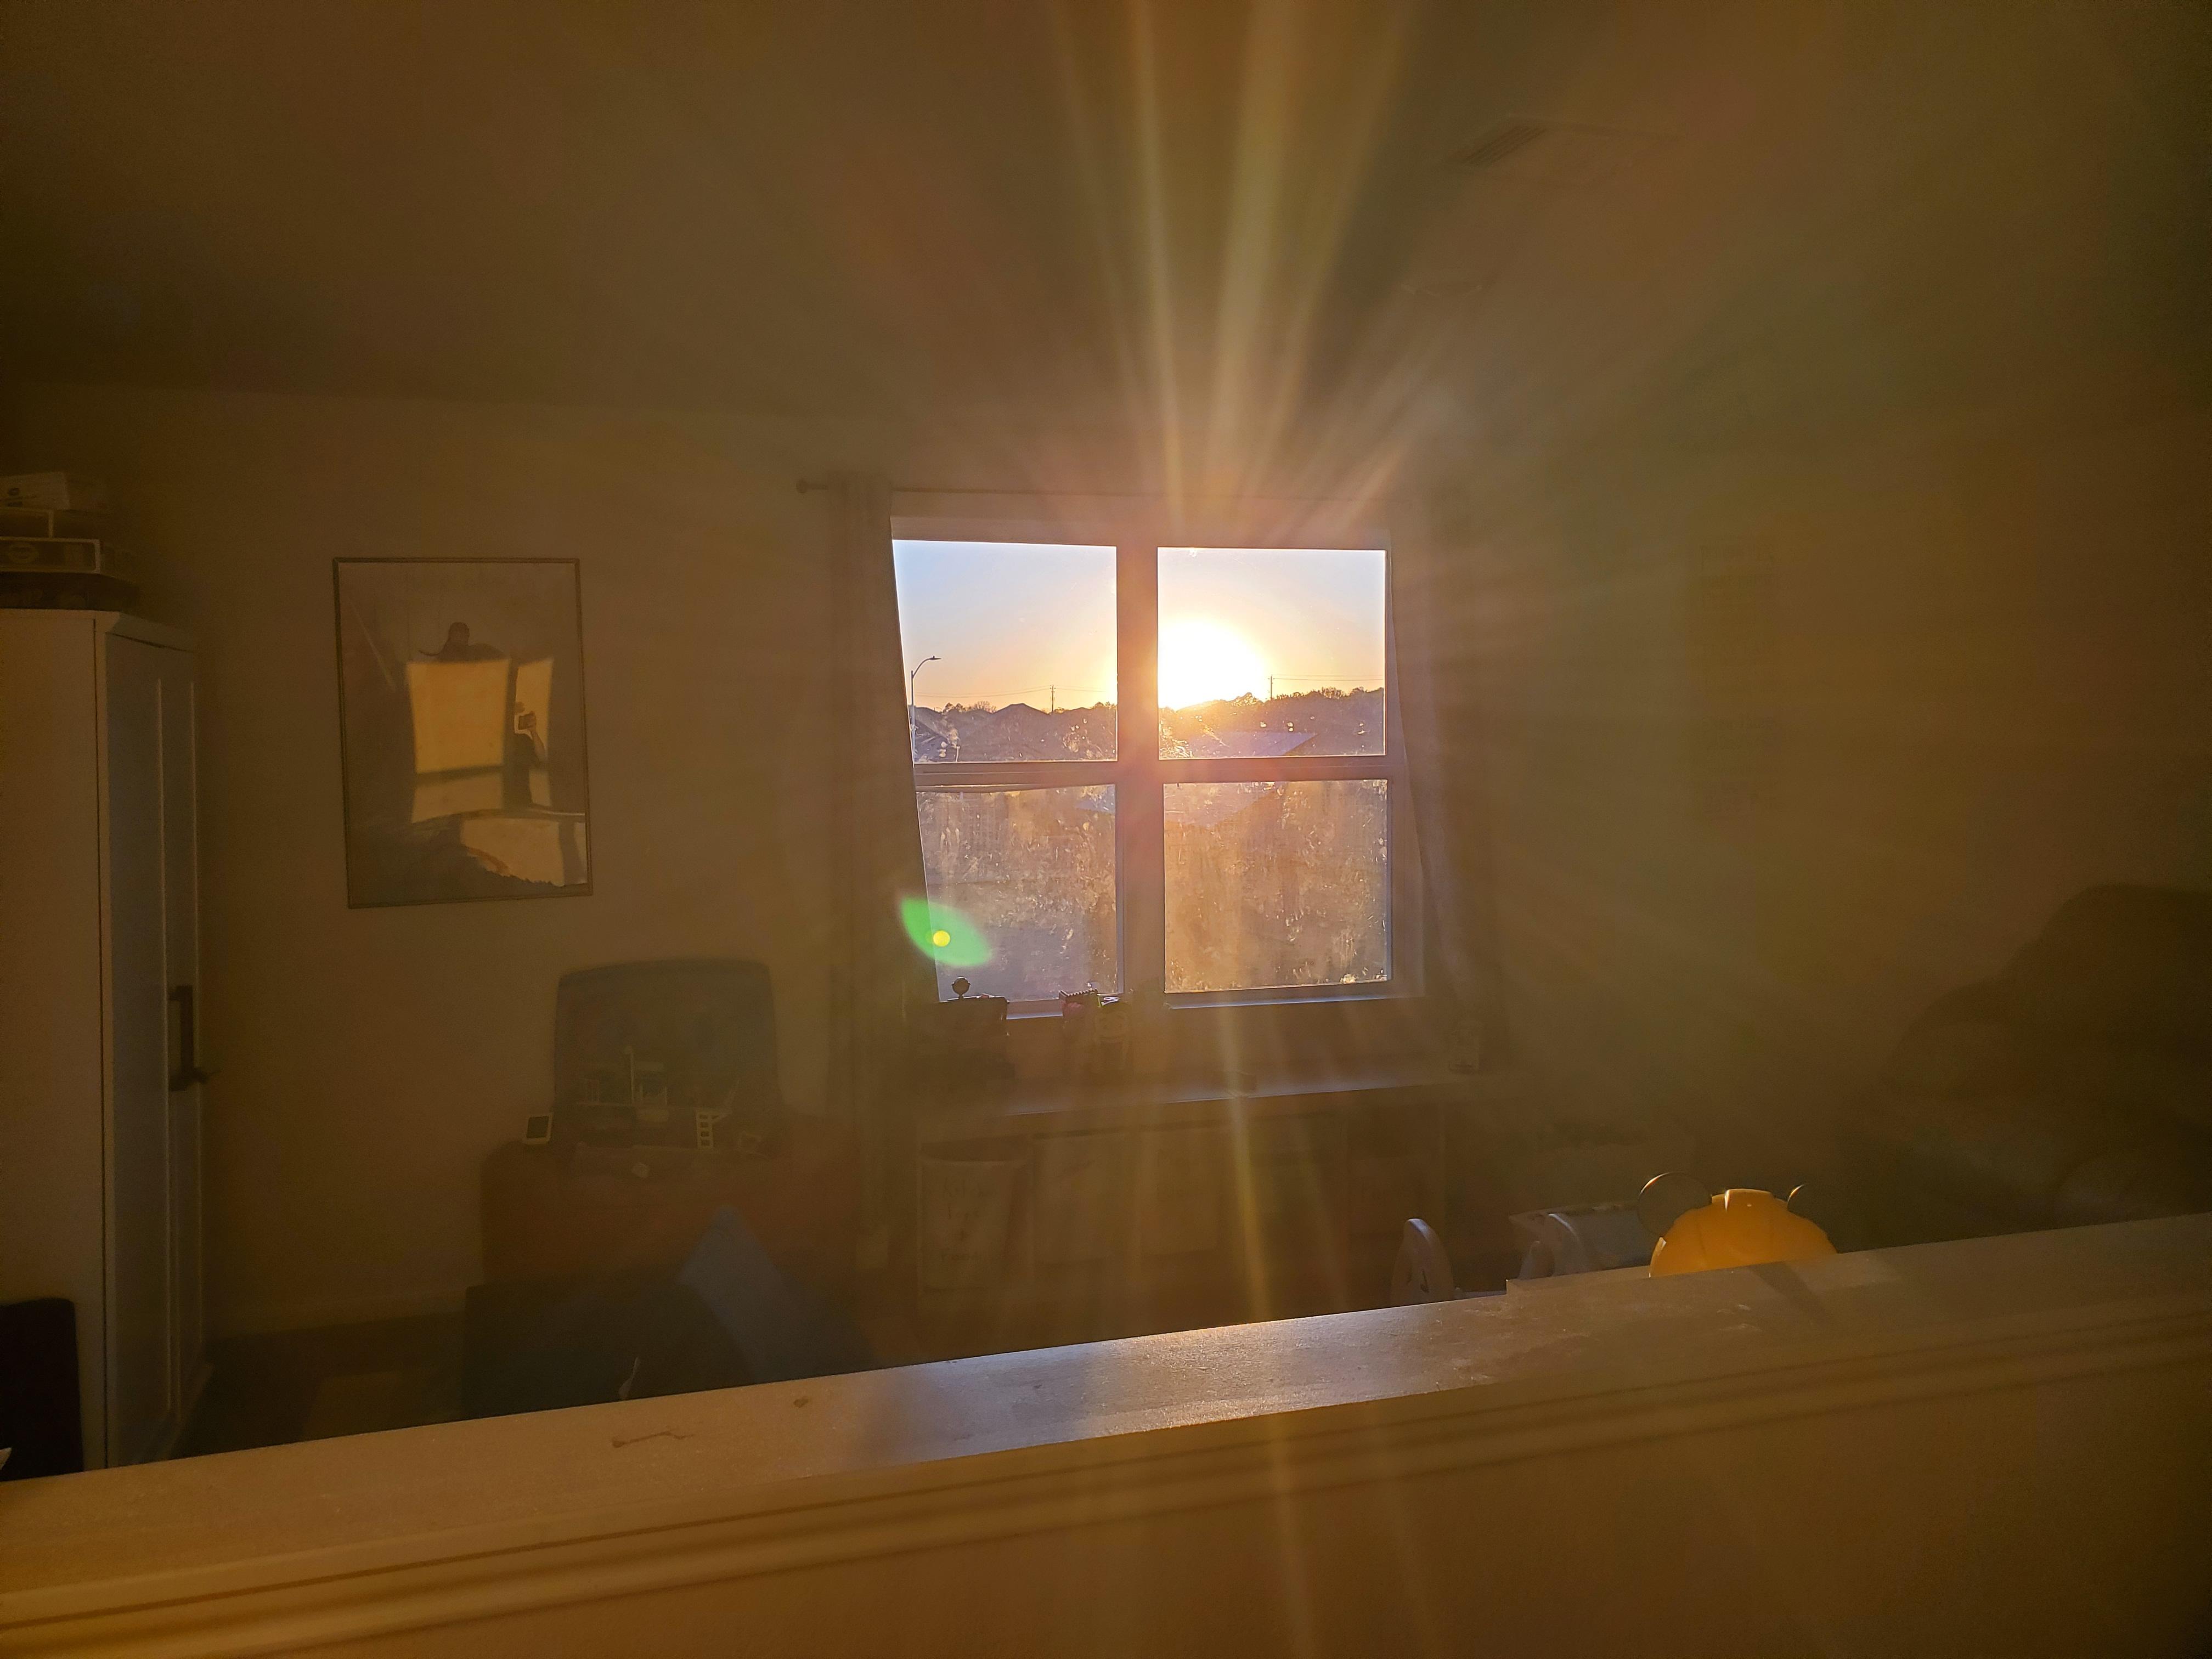 A sunset, as seen through a second floor window. The bright orange light radiates, illuminating the walls and all around it